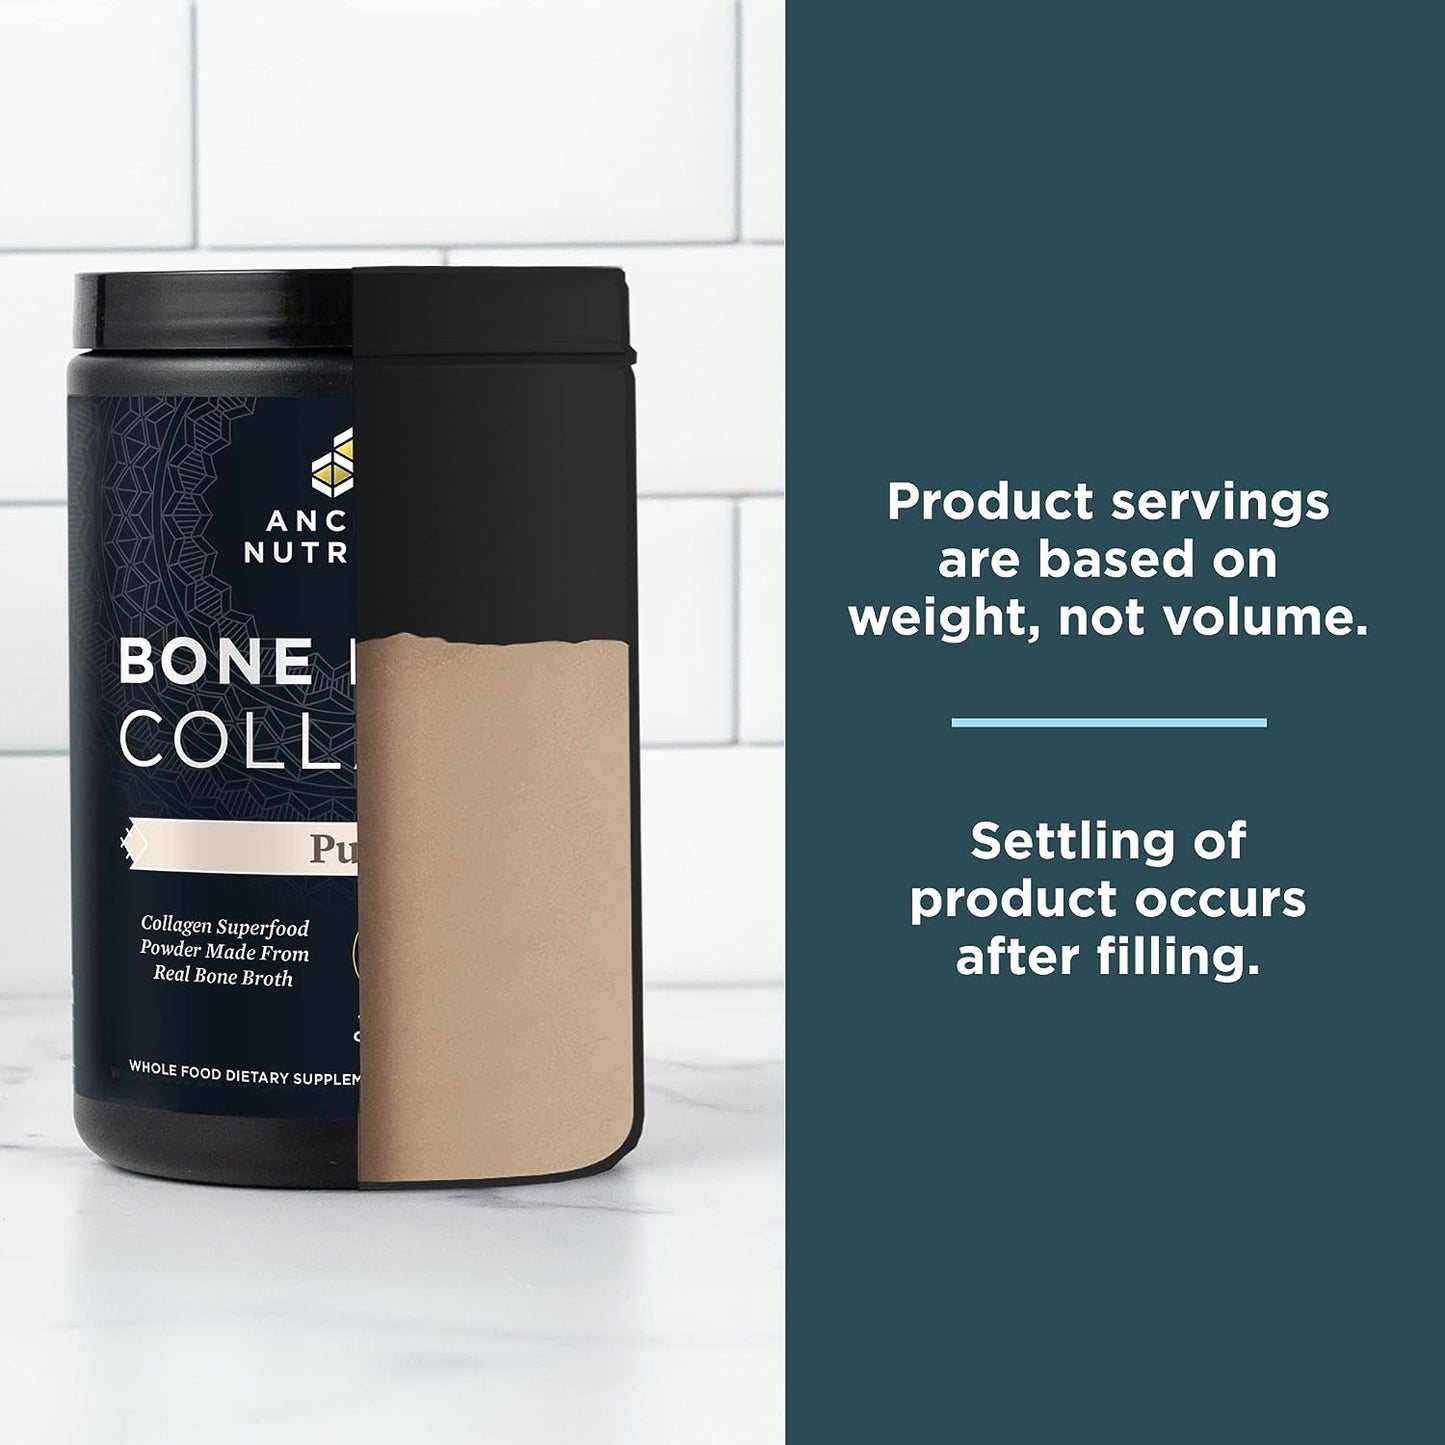 Ancient Nutrition Bone Broth Collagen Protein | Powder Pure (30 Servings)